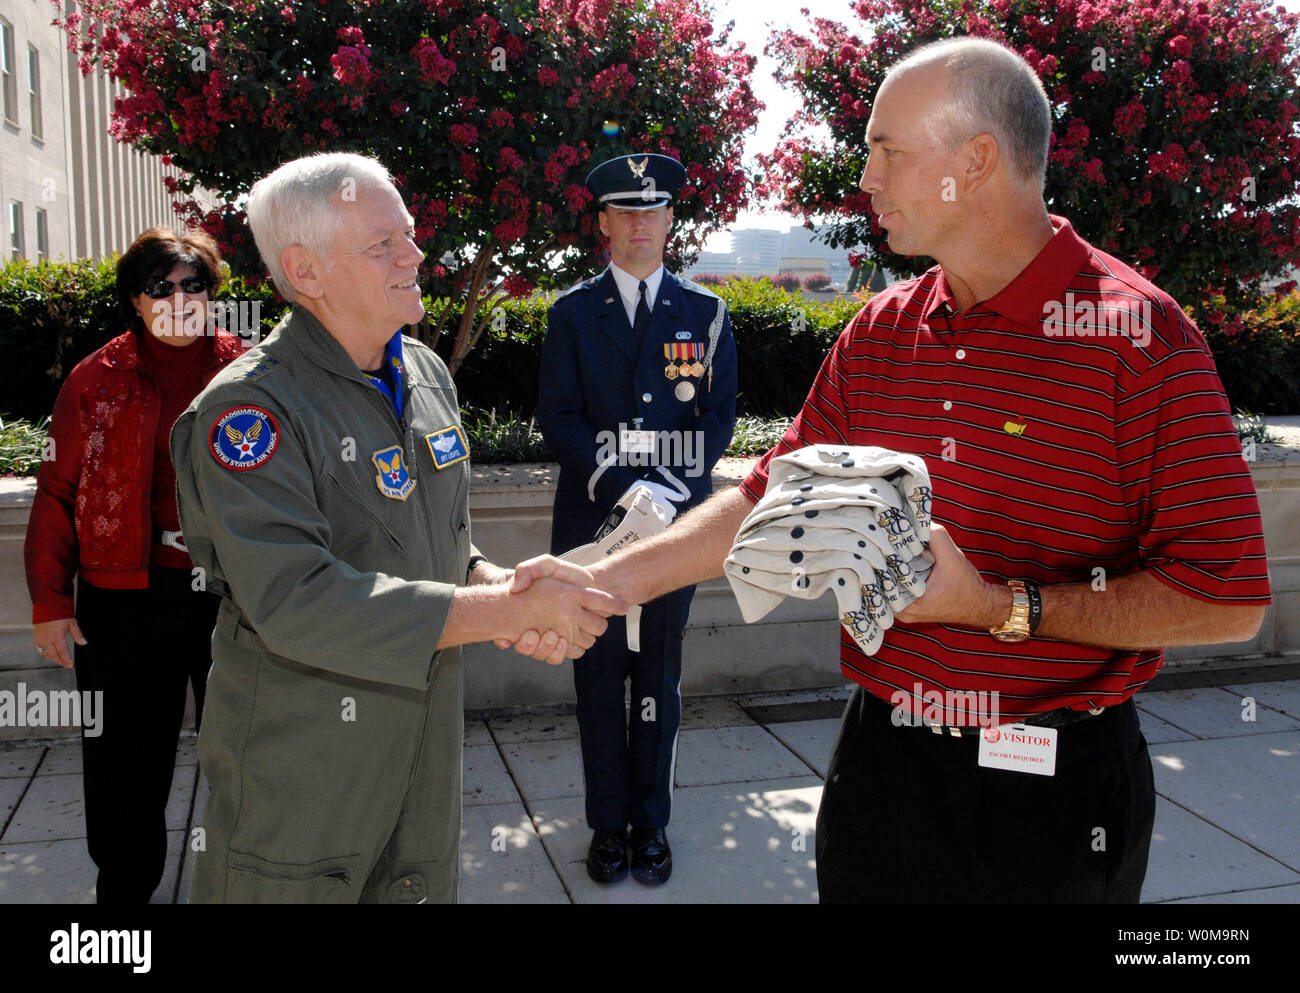 U.S. Ryder Cup team captain Tom Lehman shakes hands with U.S. Air Force Assistant Vice Chief of Staff Lt. Gen. Arthur Lichte after the two exchanged mementos during the Ryder Cup team's visit to the Pentagon on Sept. 17, 2006. The team then went to visit wounded military personnel at Walter Reed Army Medical Center before departing for Ireland to participate in the Professional Golf Association (PGA) Ryder Cup Tournament. (UPI Photo/Cohen A. Young/USAF) Stock Photo